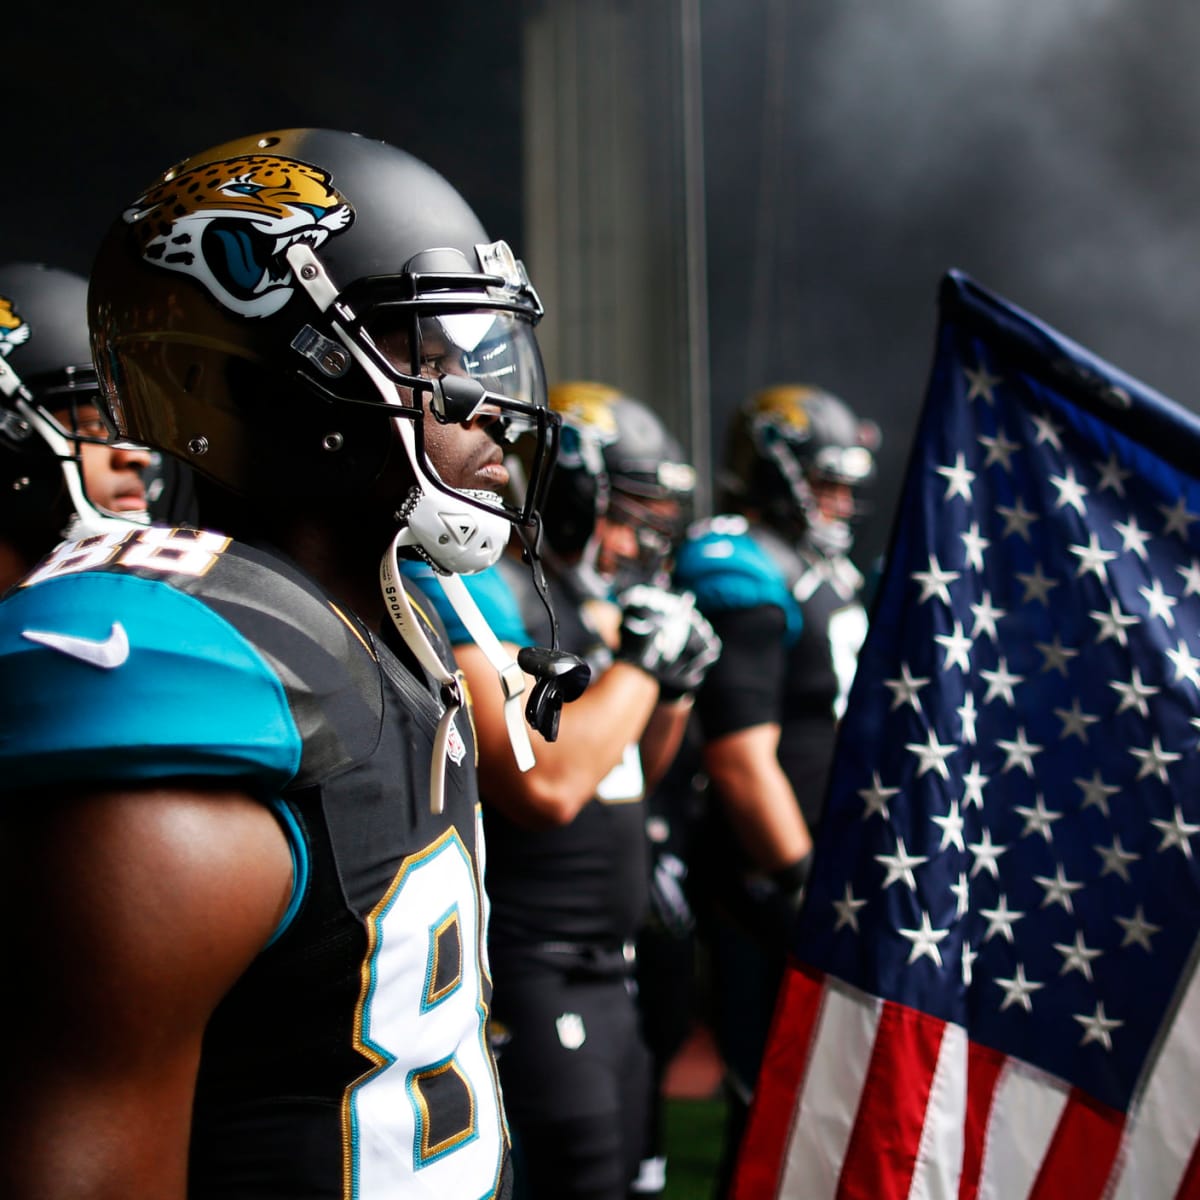 Why do the Jaguars play in London every year? 